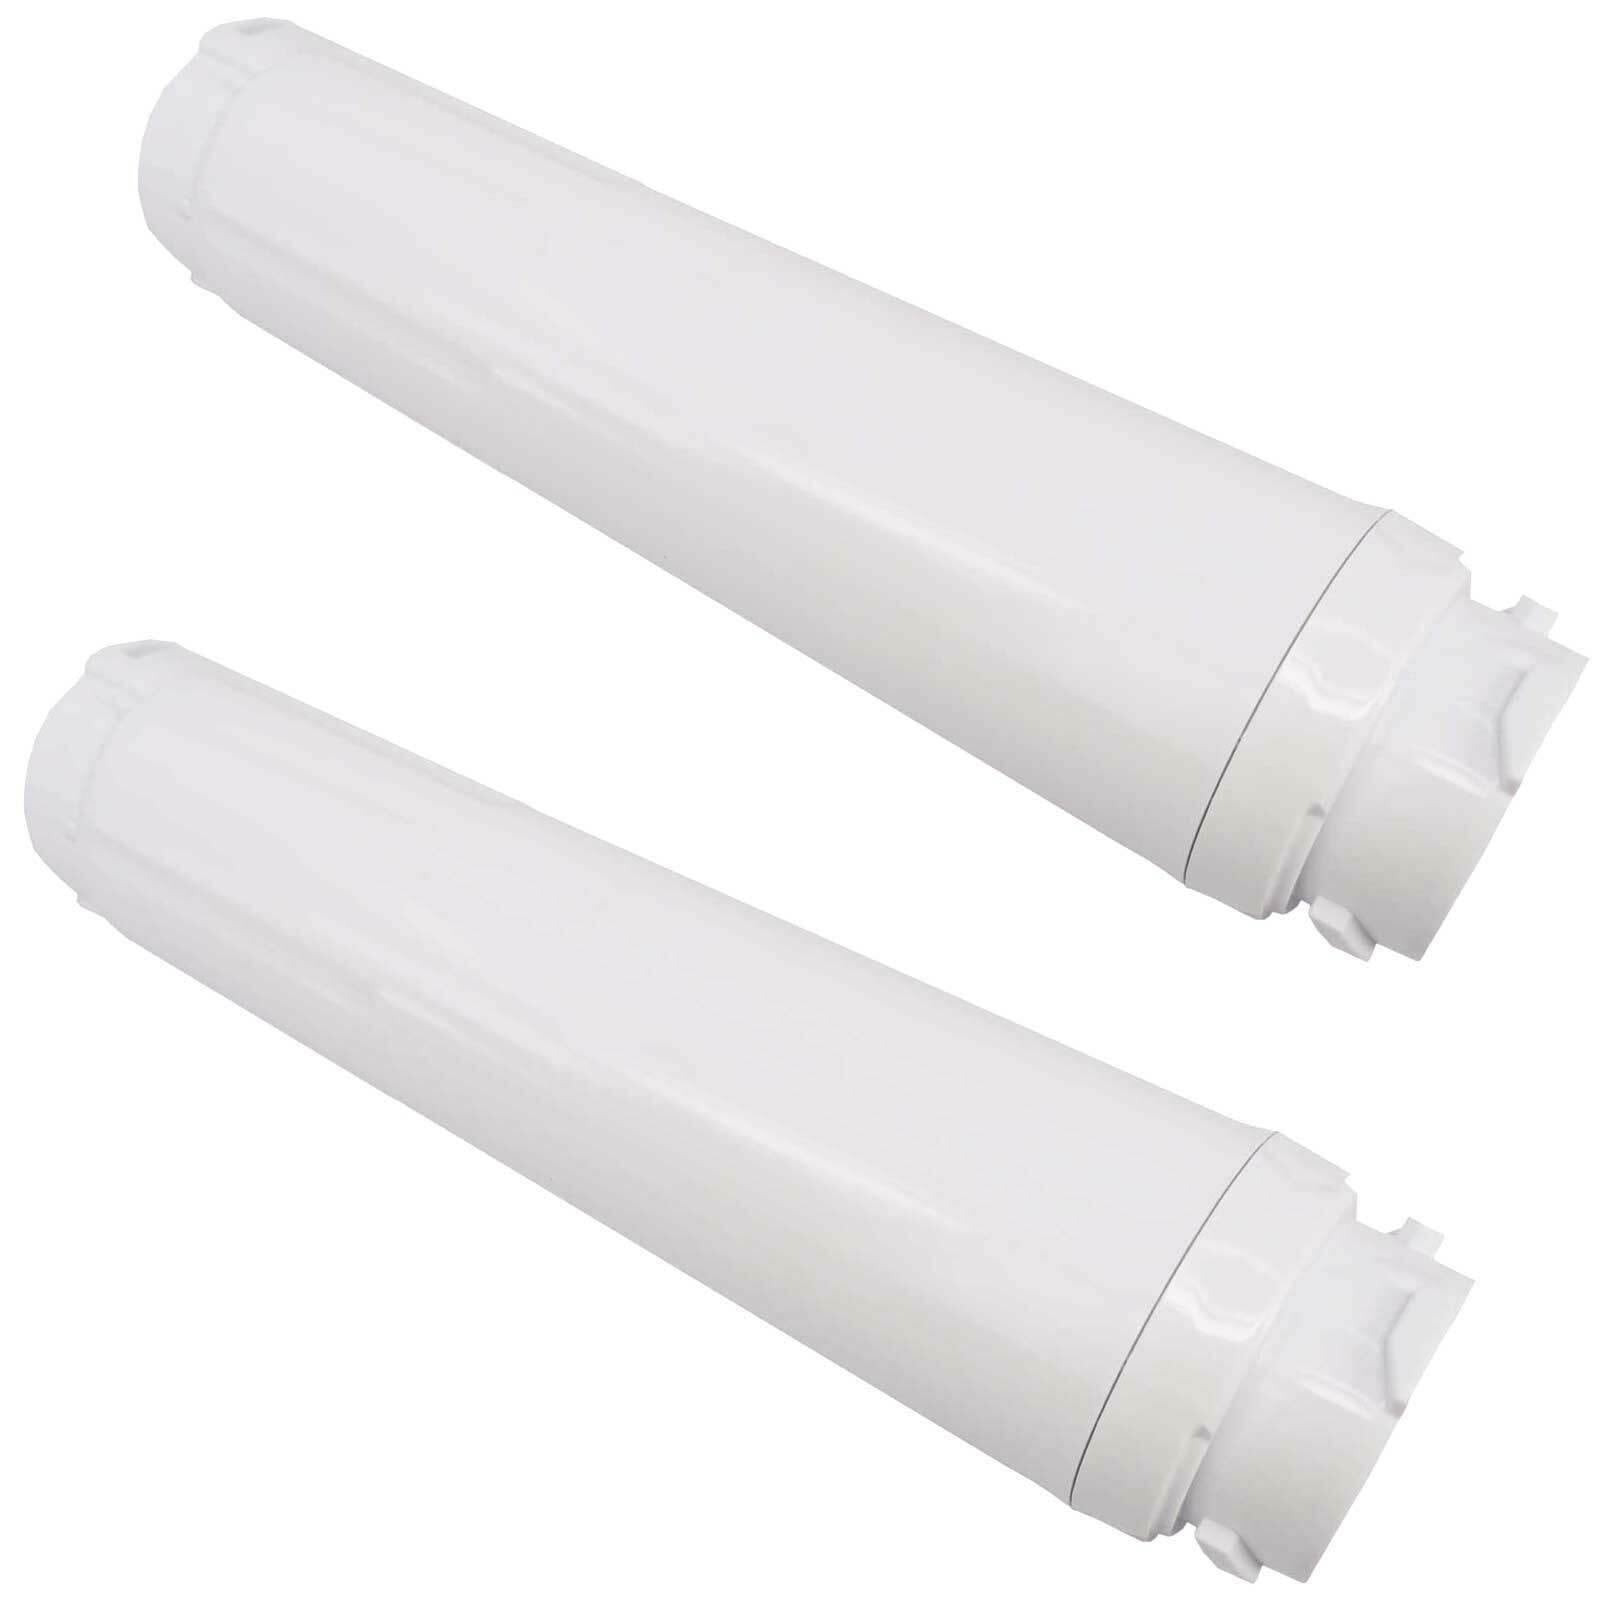 Fridge Water Filter Replacement For Haier RF-2800-15, 10169, 101698B, 101699 Sparesbarn